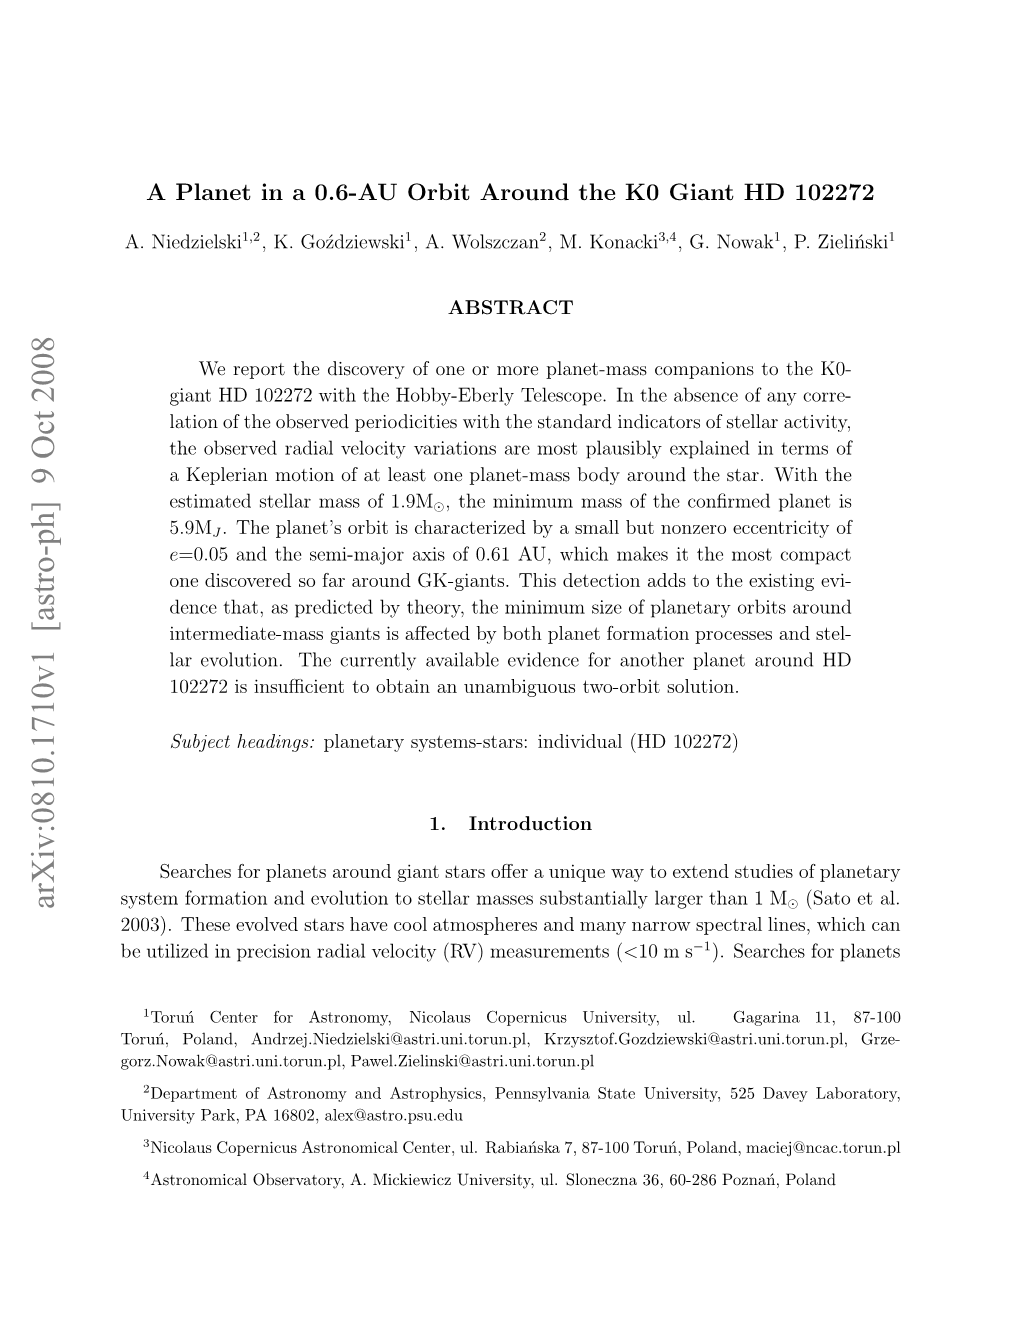 A Planet in a 0.6-AU Orbit Around the K0 Giant HD 102272